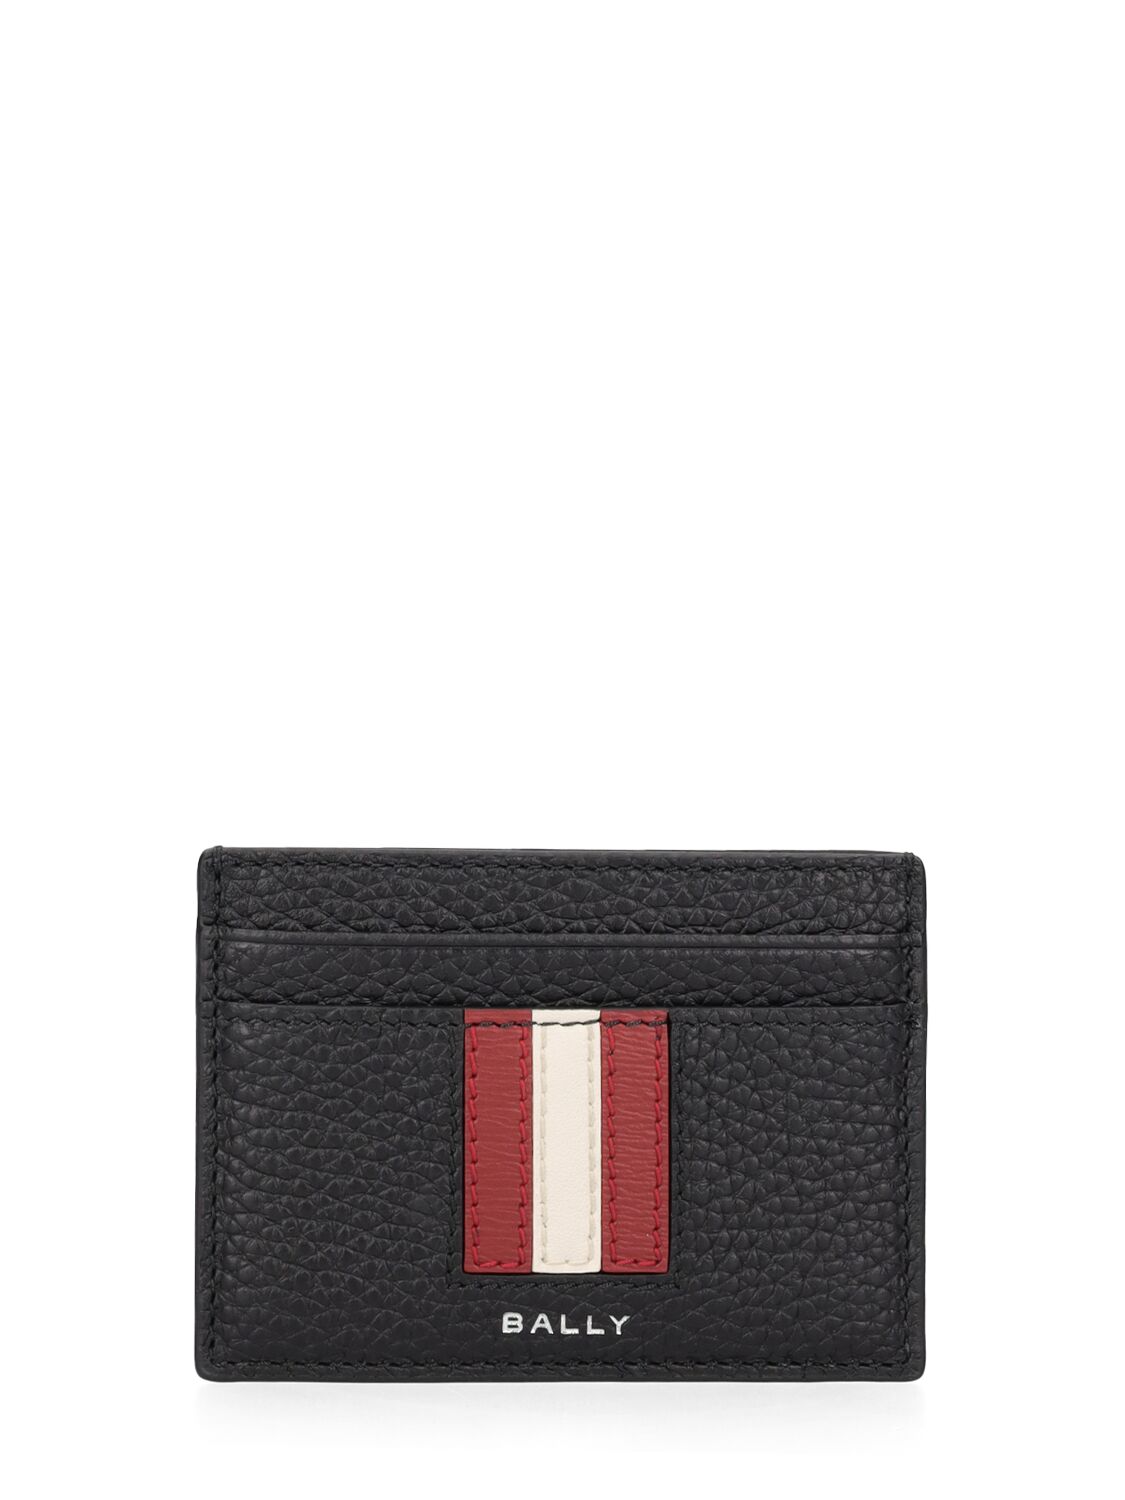 Bally Thar Leather Cardholder In Black,red